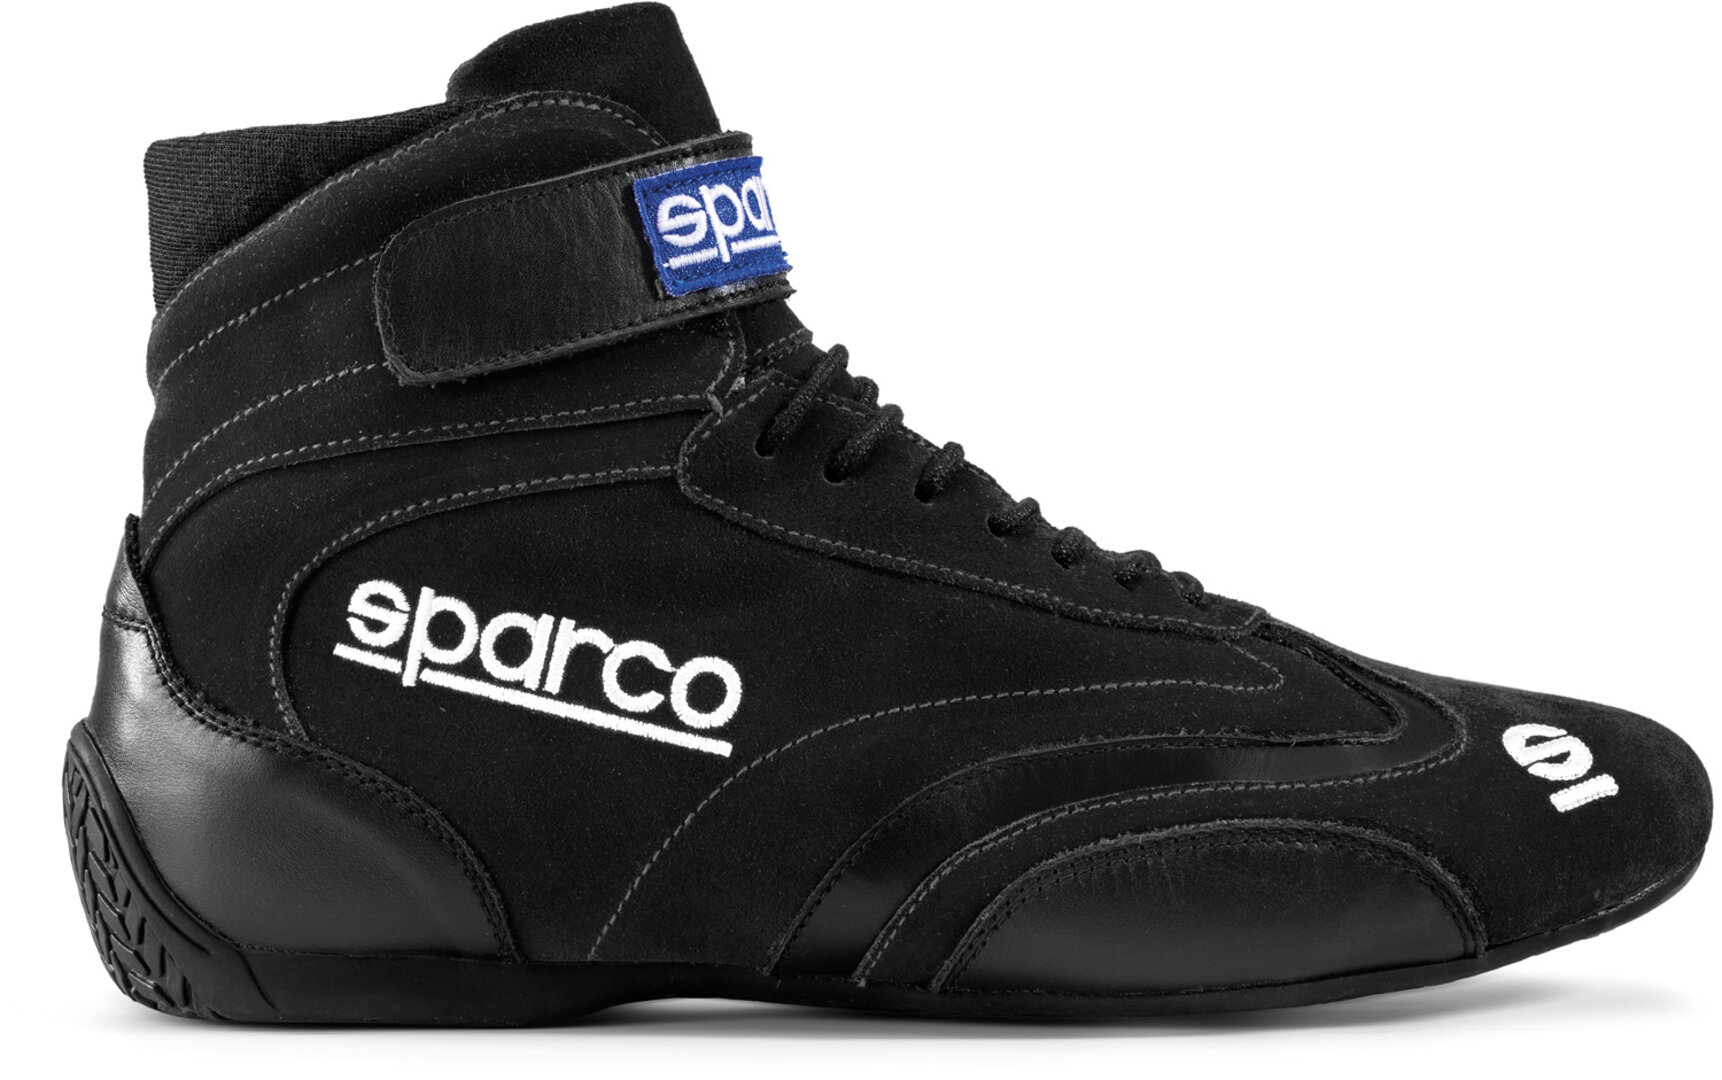 “Sparco